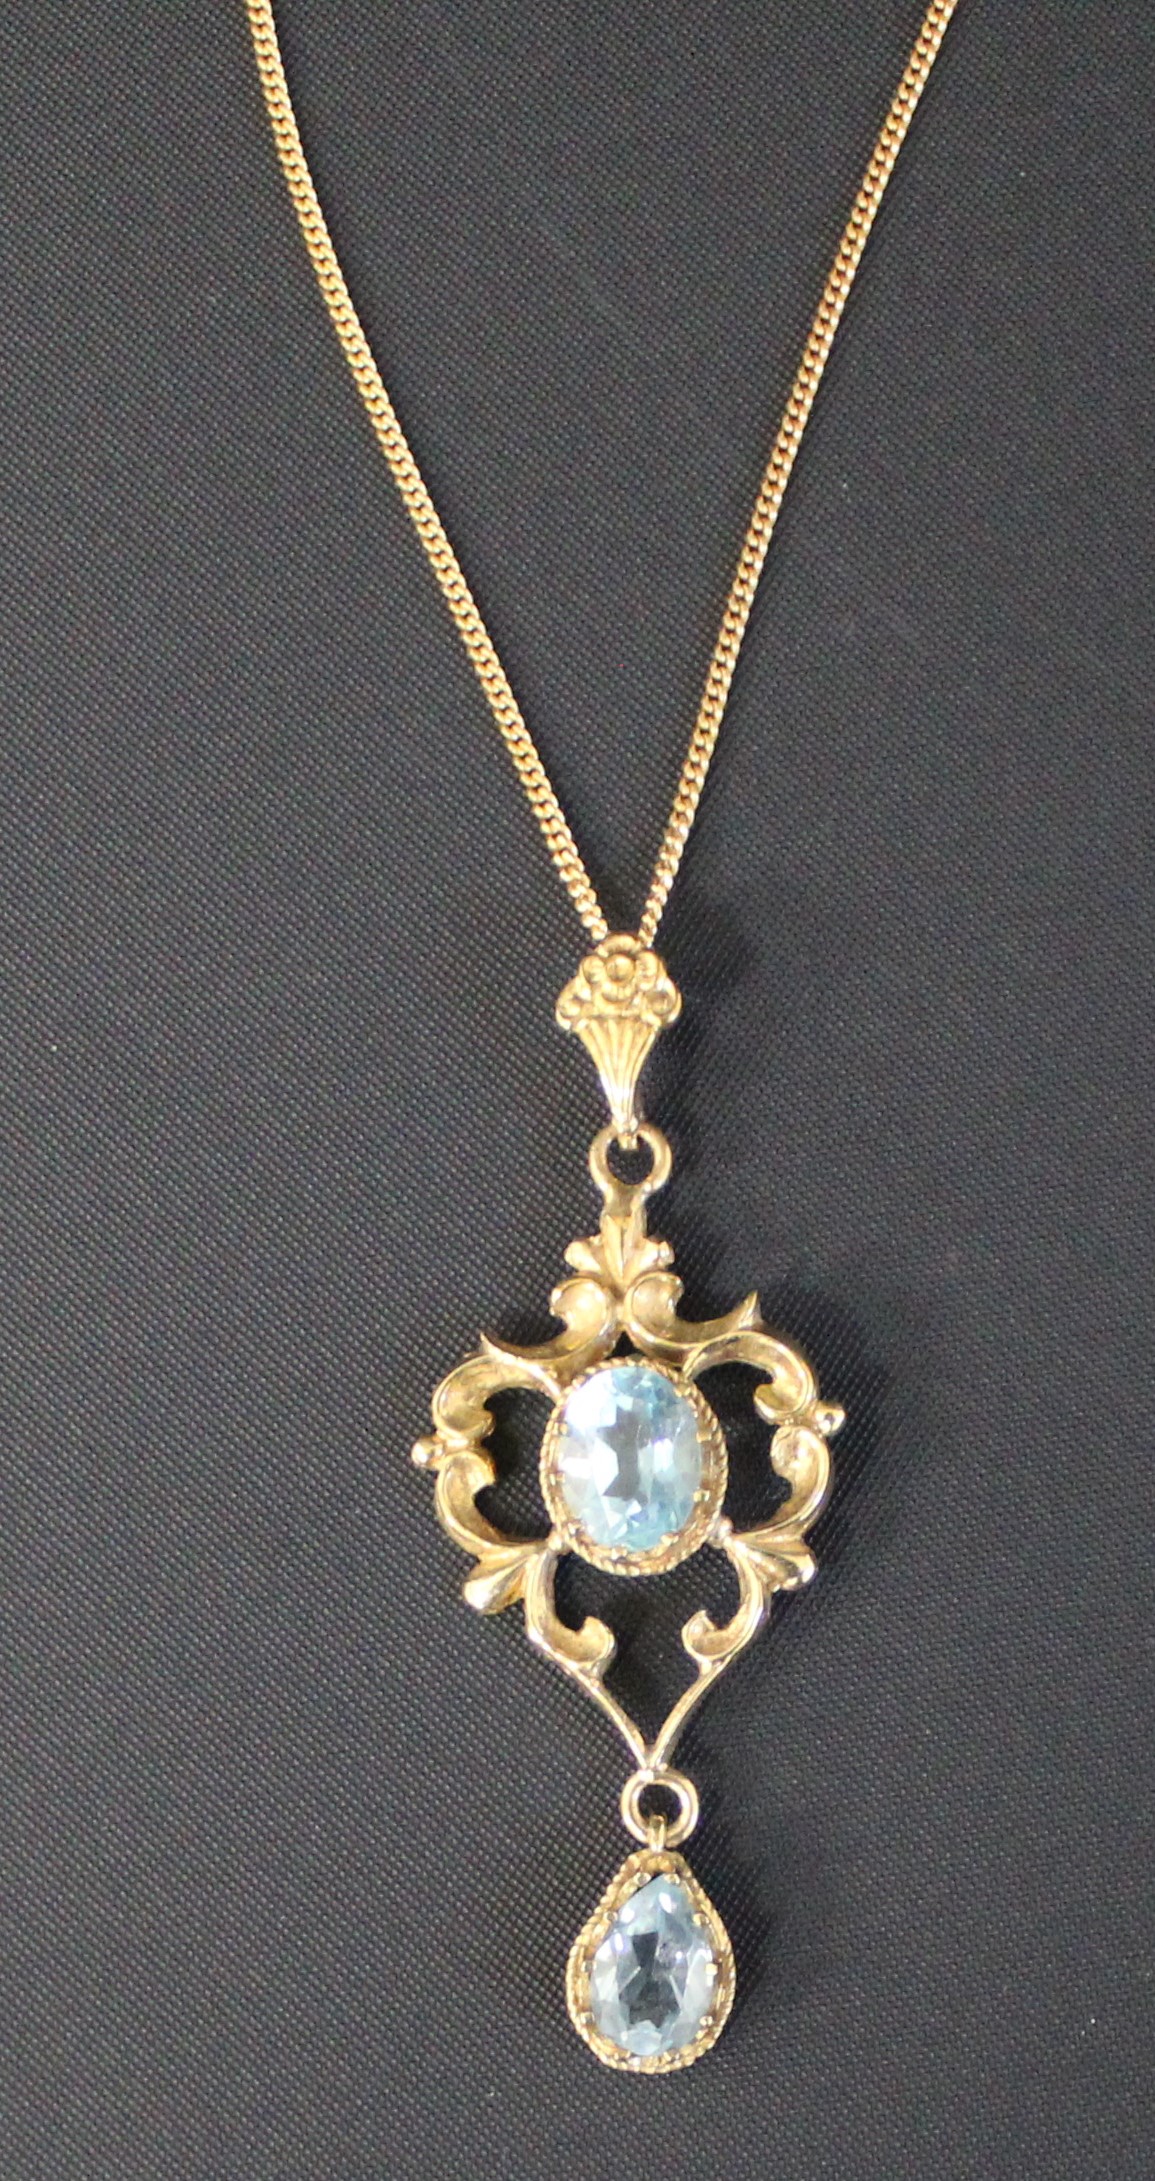 Tested as 9ct gold aquamarine pendant (4.80g) on 9ct gold chain (2.26g)